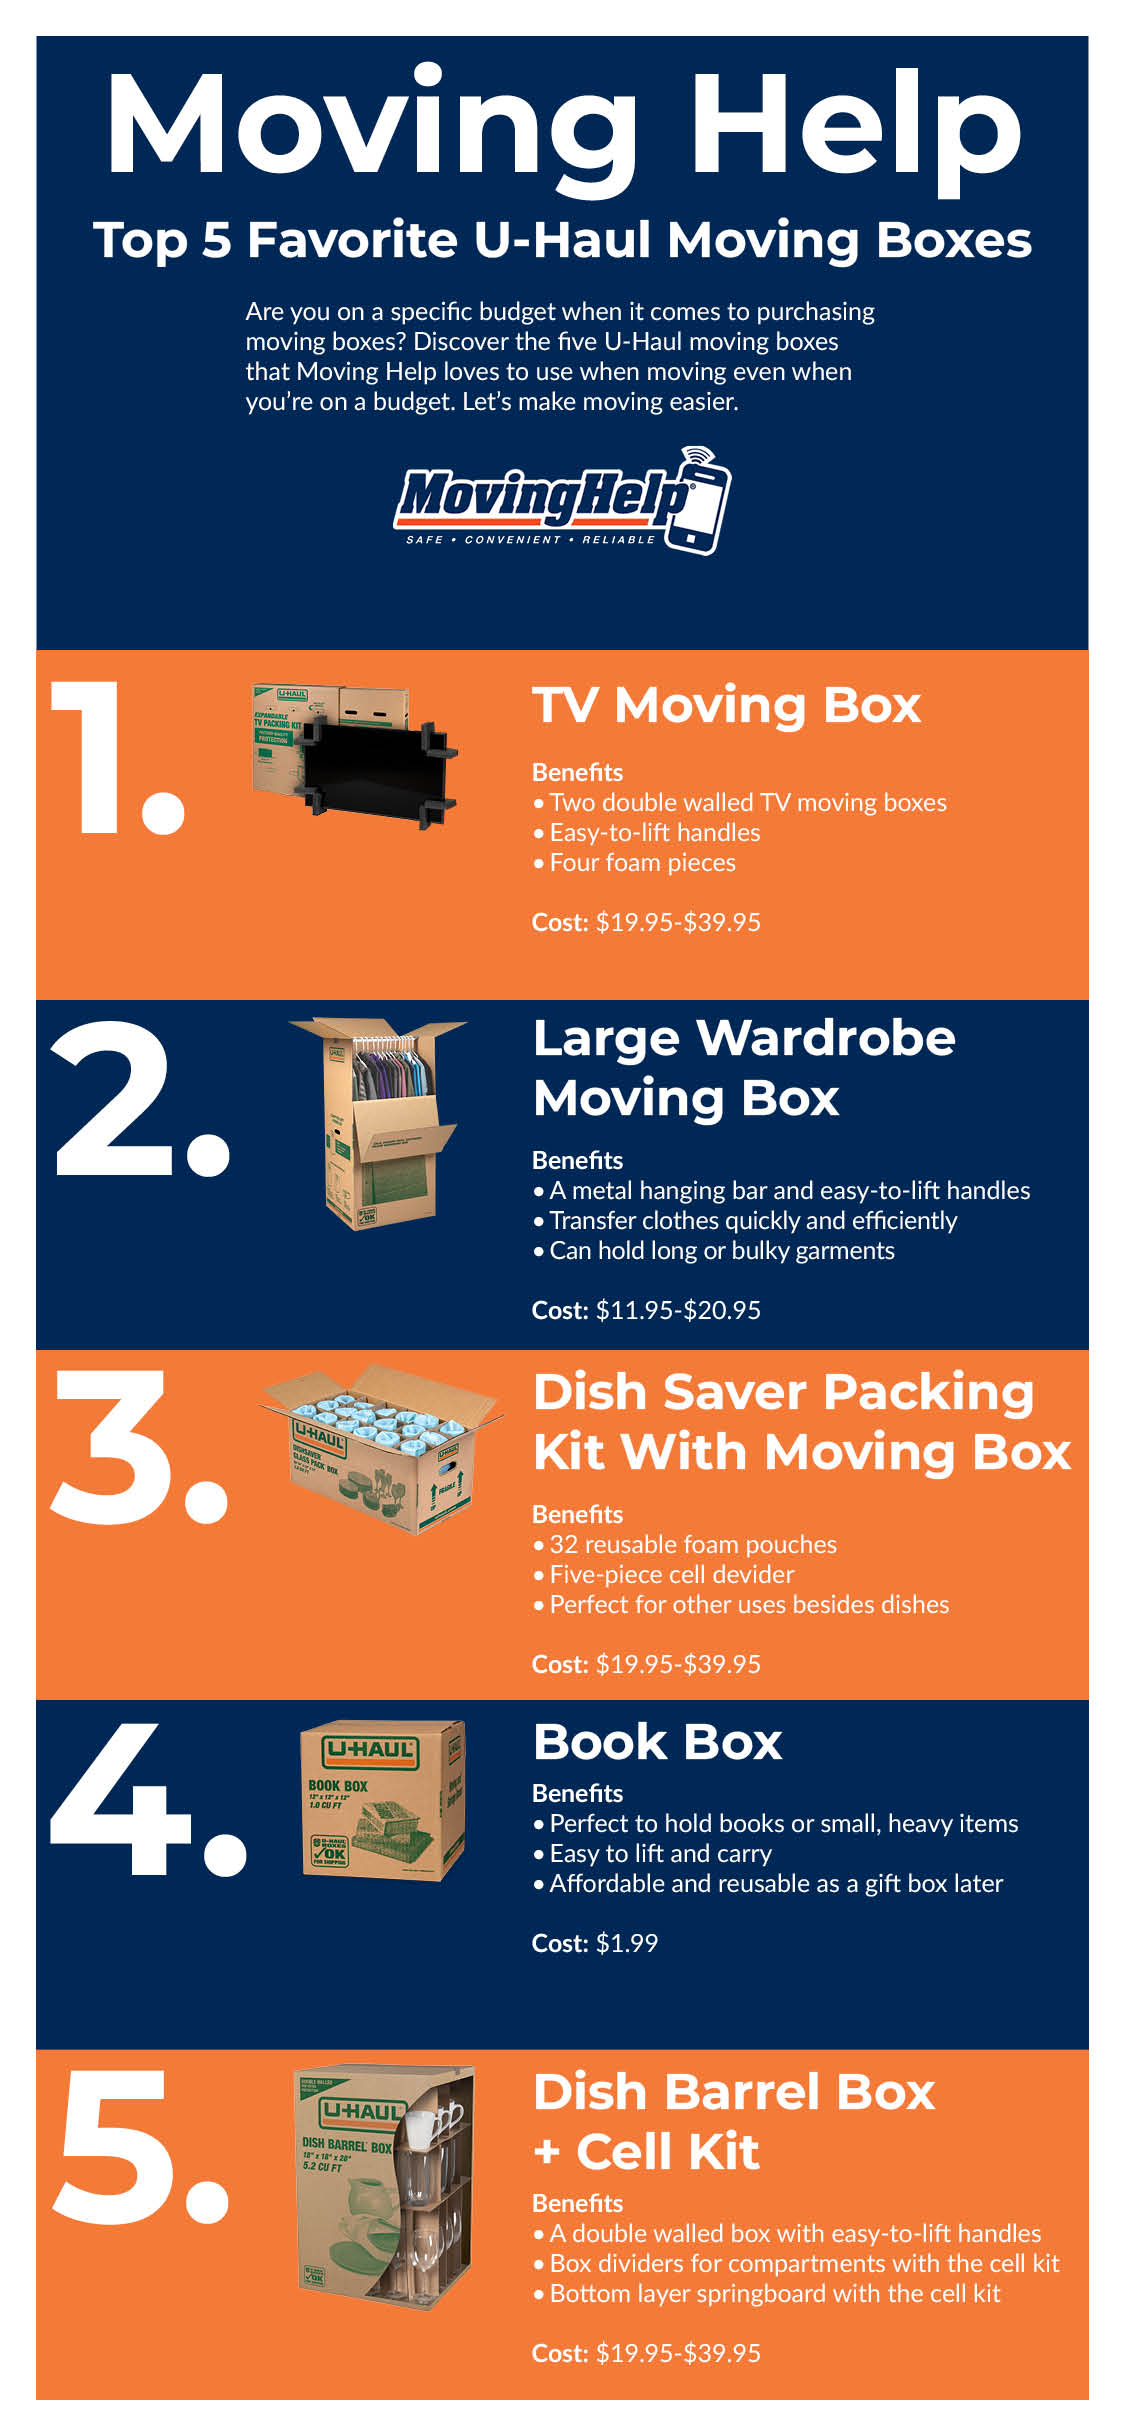 The infographic shows Moving Help’s Top 5 must-have U-Haul moving boxes. These boxes include: a TV moving box, a wardrobe moving box, a dish saver packing kit with moving box, a book box, and a dish barrel box plus a cell kit.